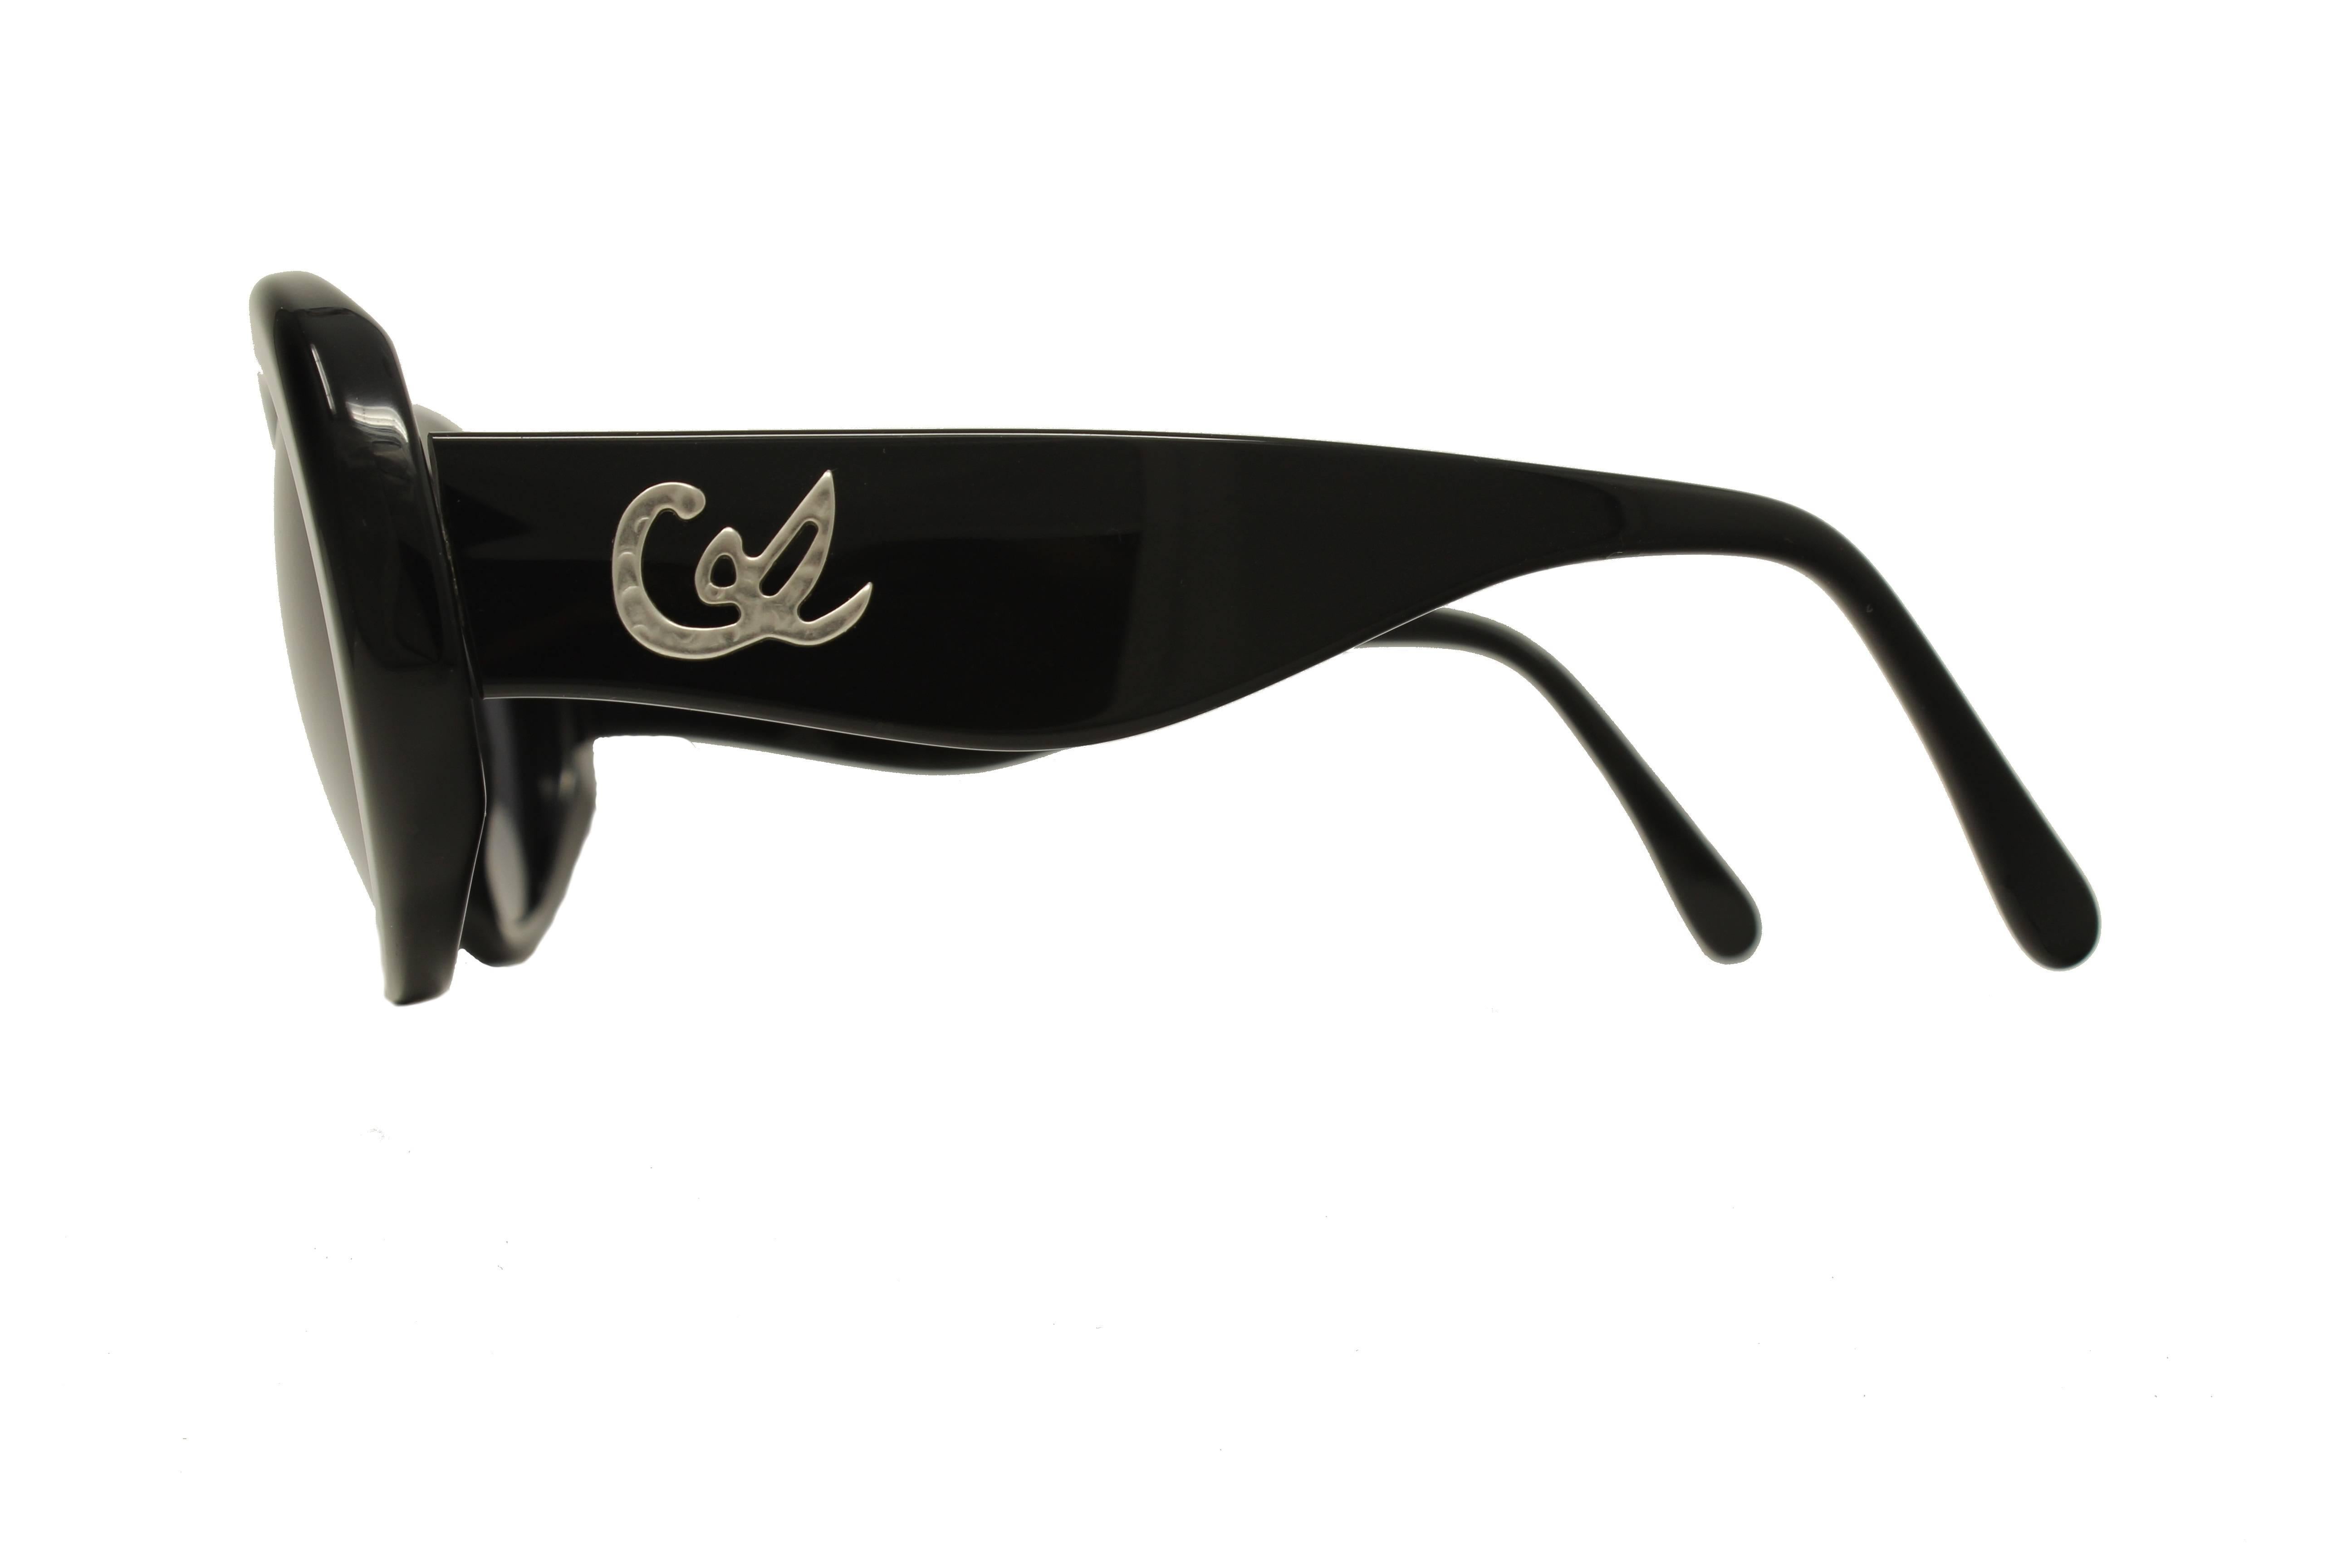 Christian Lacroix vintage sunglasses. This model has an elegant and classic shape in black acetate.
The grey uniform lenses are category 3 and provide 100% UV protection. Both temples have the designer signature.


Measurements
- Distance between